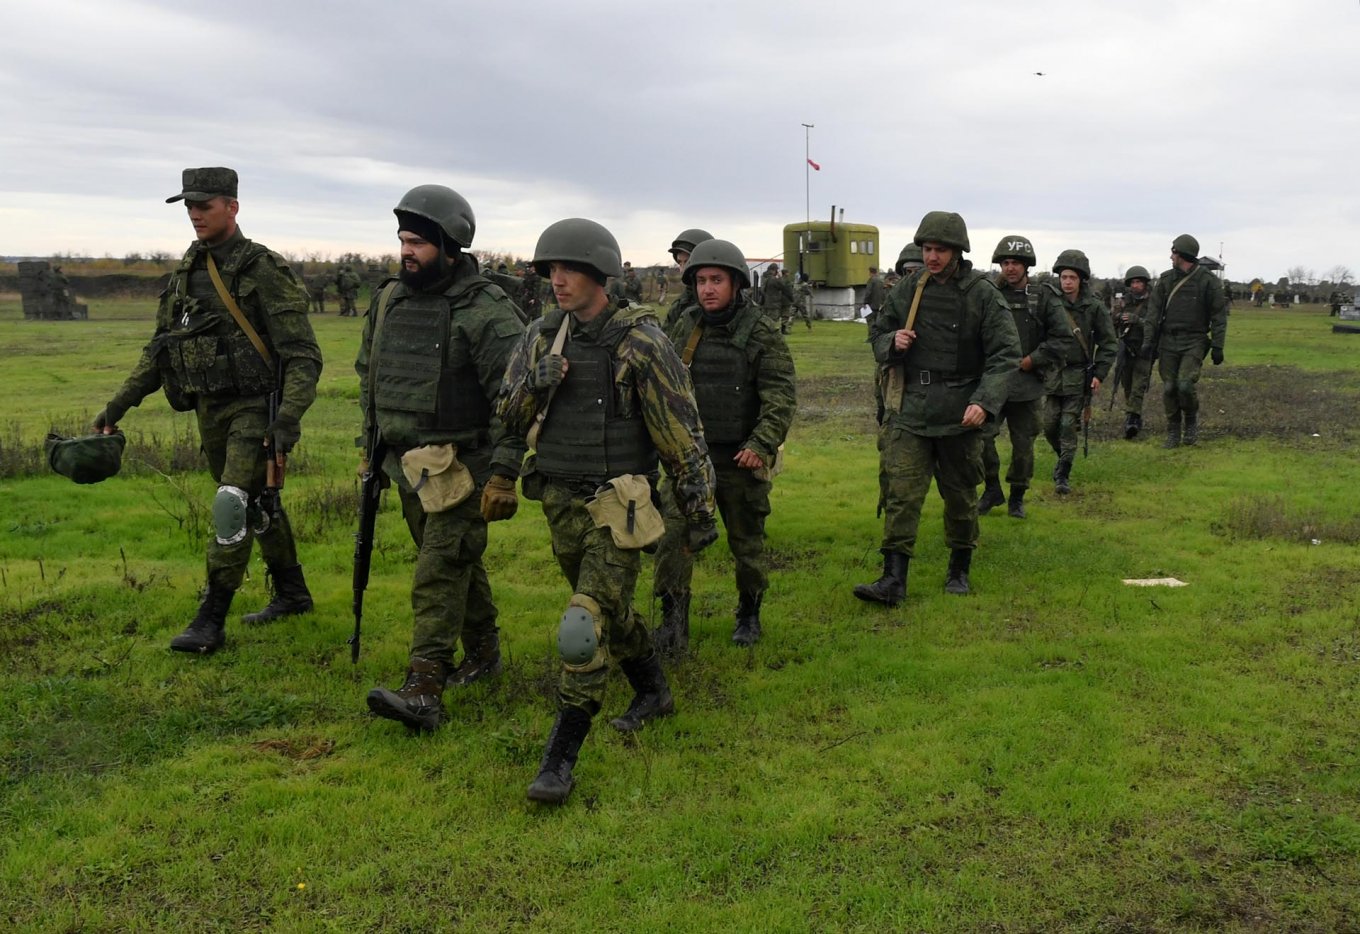 russian mobilized troops on a training ground in occupied territories of Ukraine